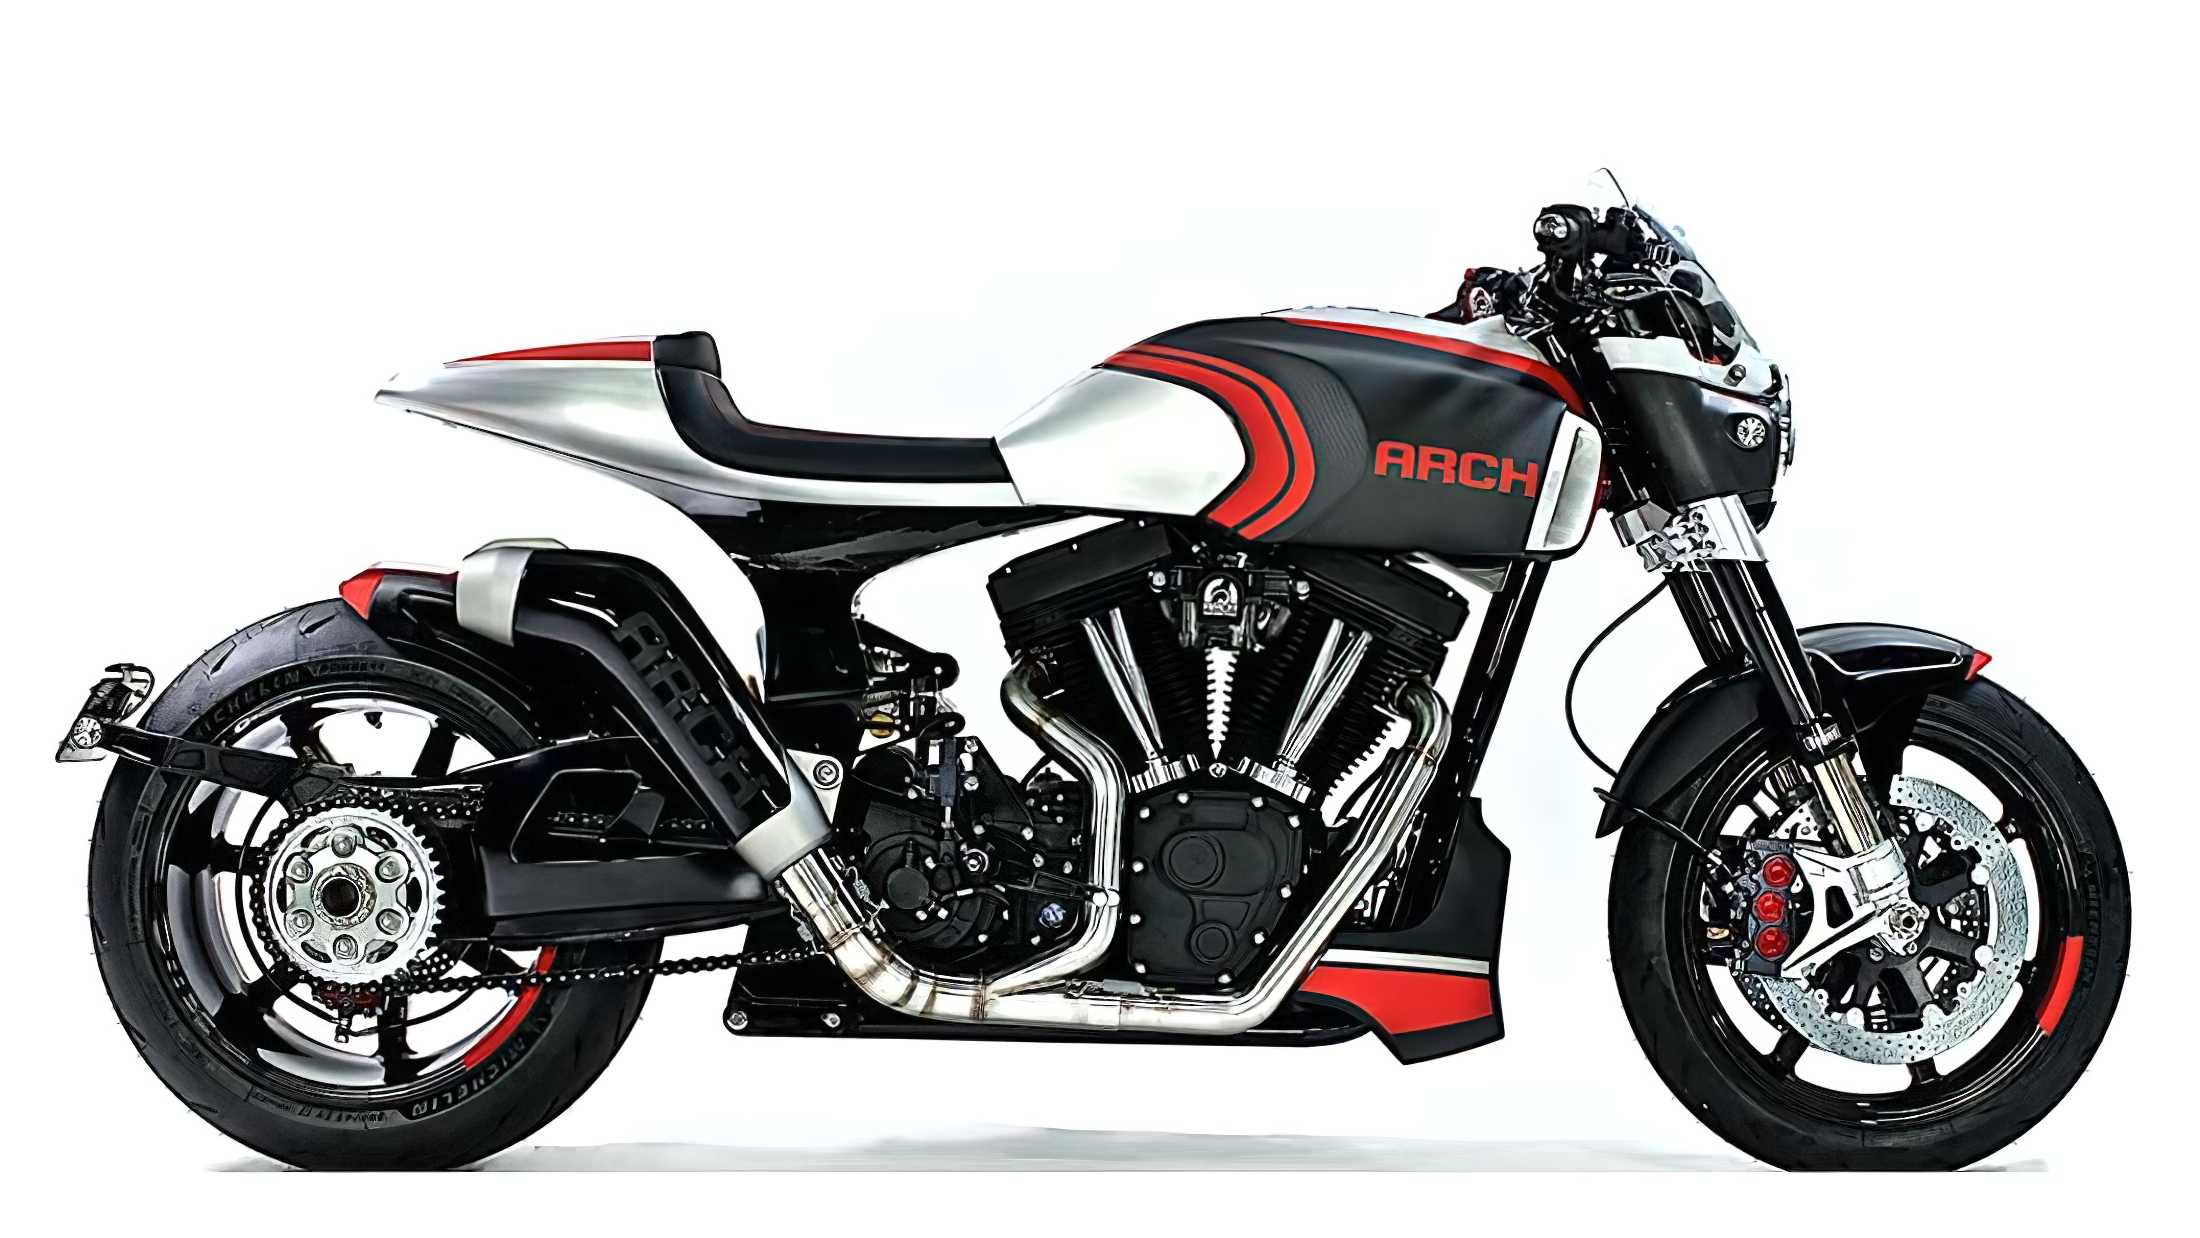 New: Arch Motorcycles 1S
- also in the MOTORCYCLES.NEWS APP